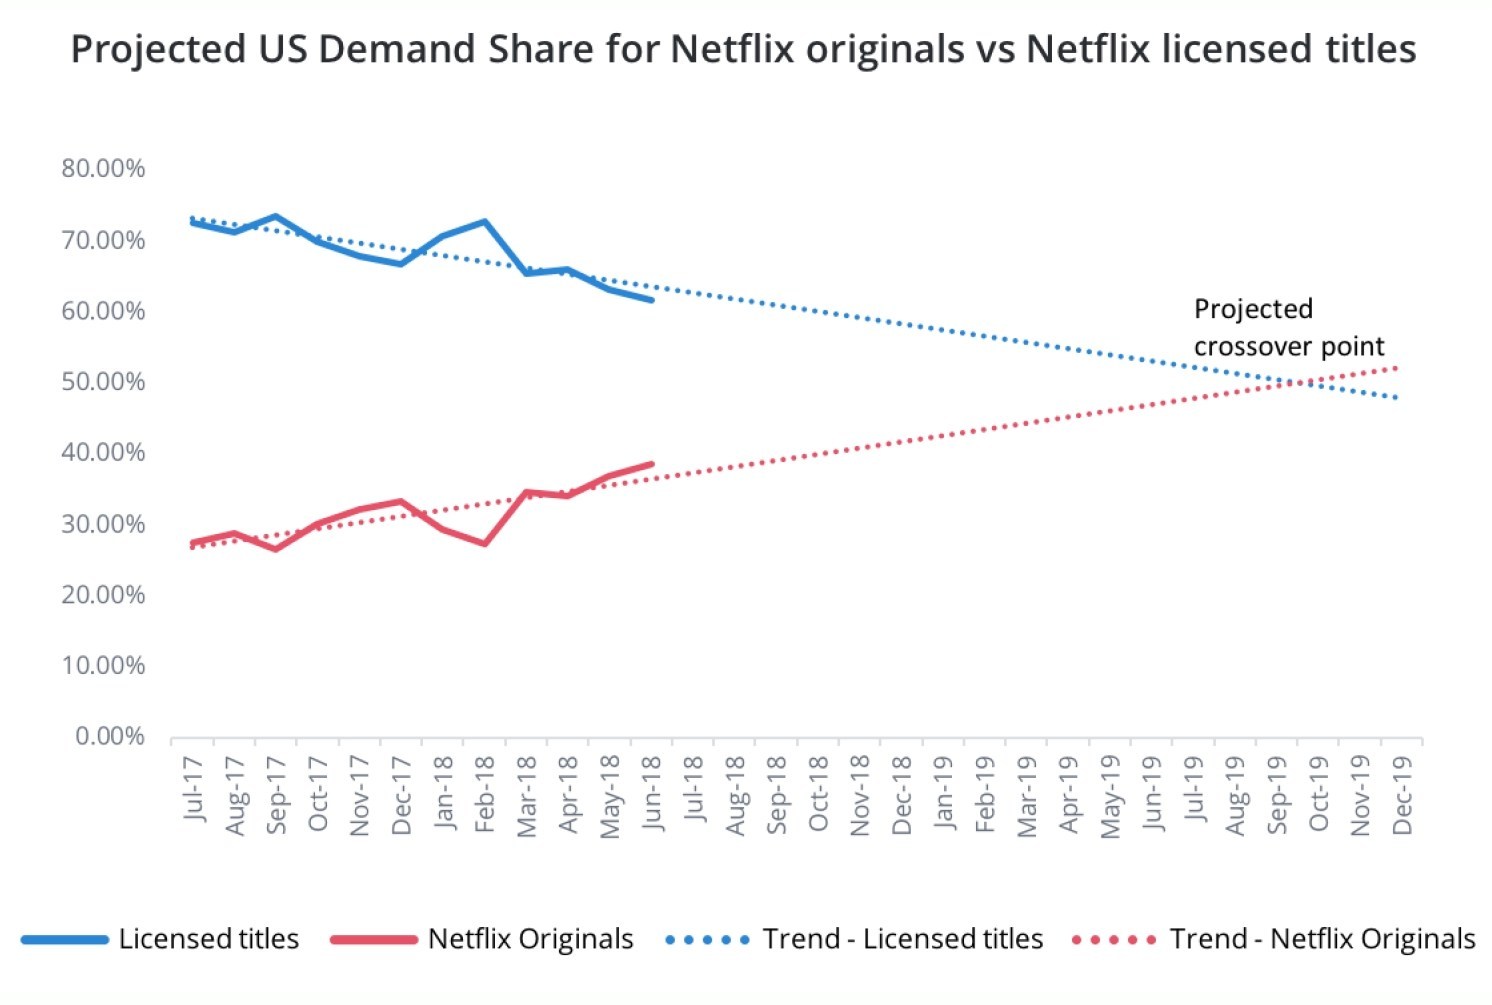 Audience Demand For Netflix Originals On Track To Overtake That For Its Licensed Titles In 2019